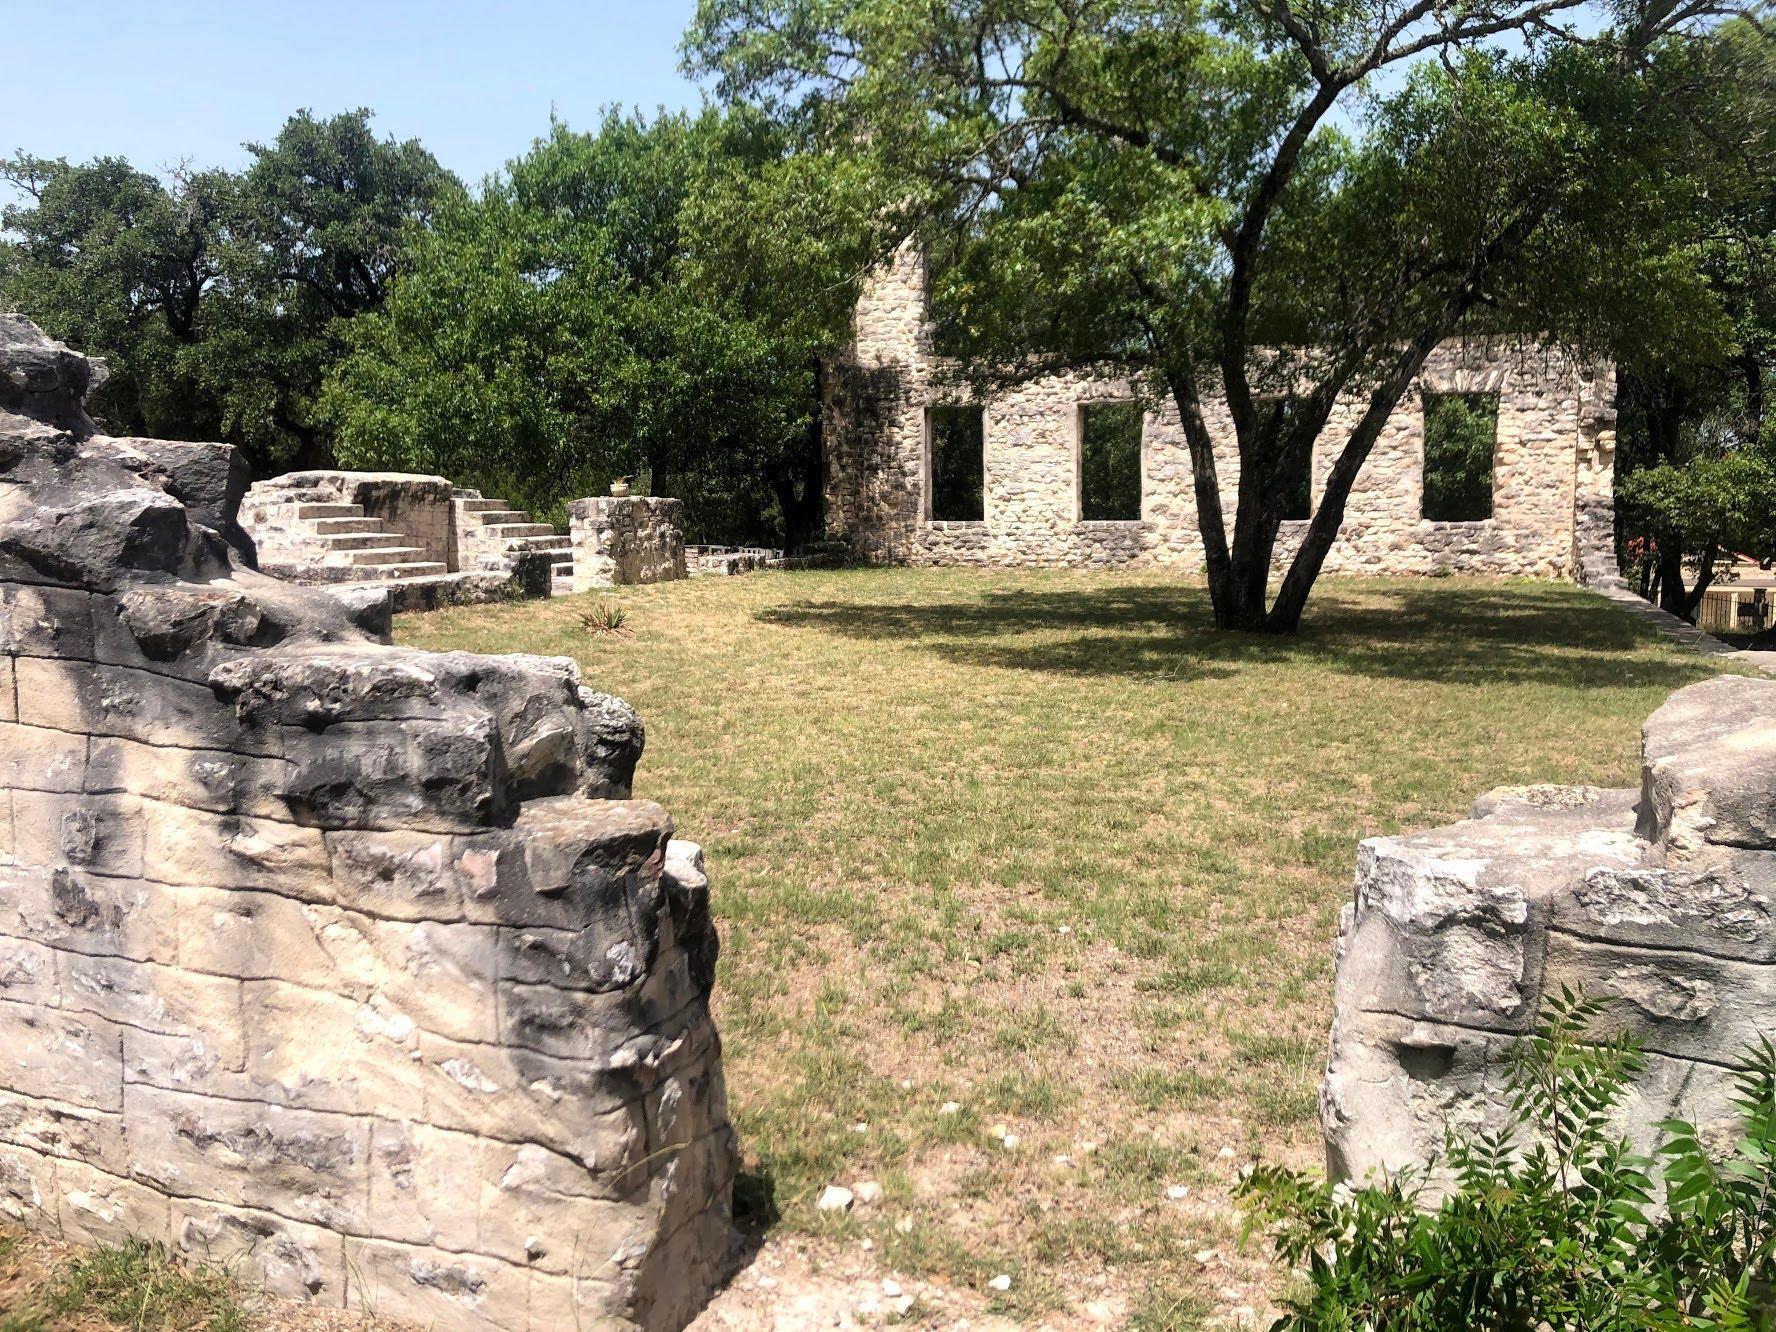 Ruins of a former college at Salado. A tree grow in between the ruins of some buildings.